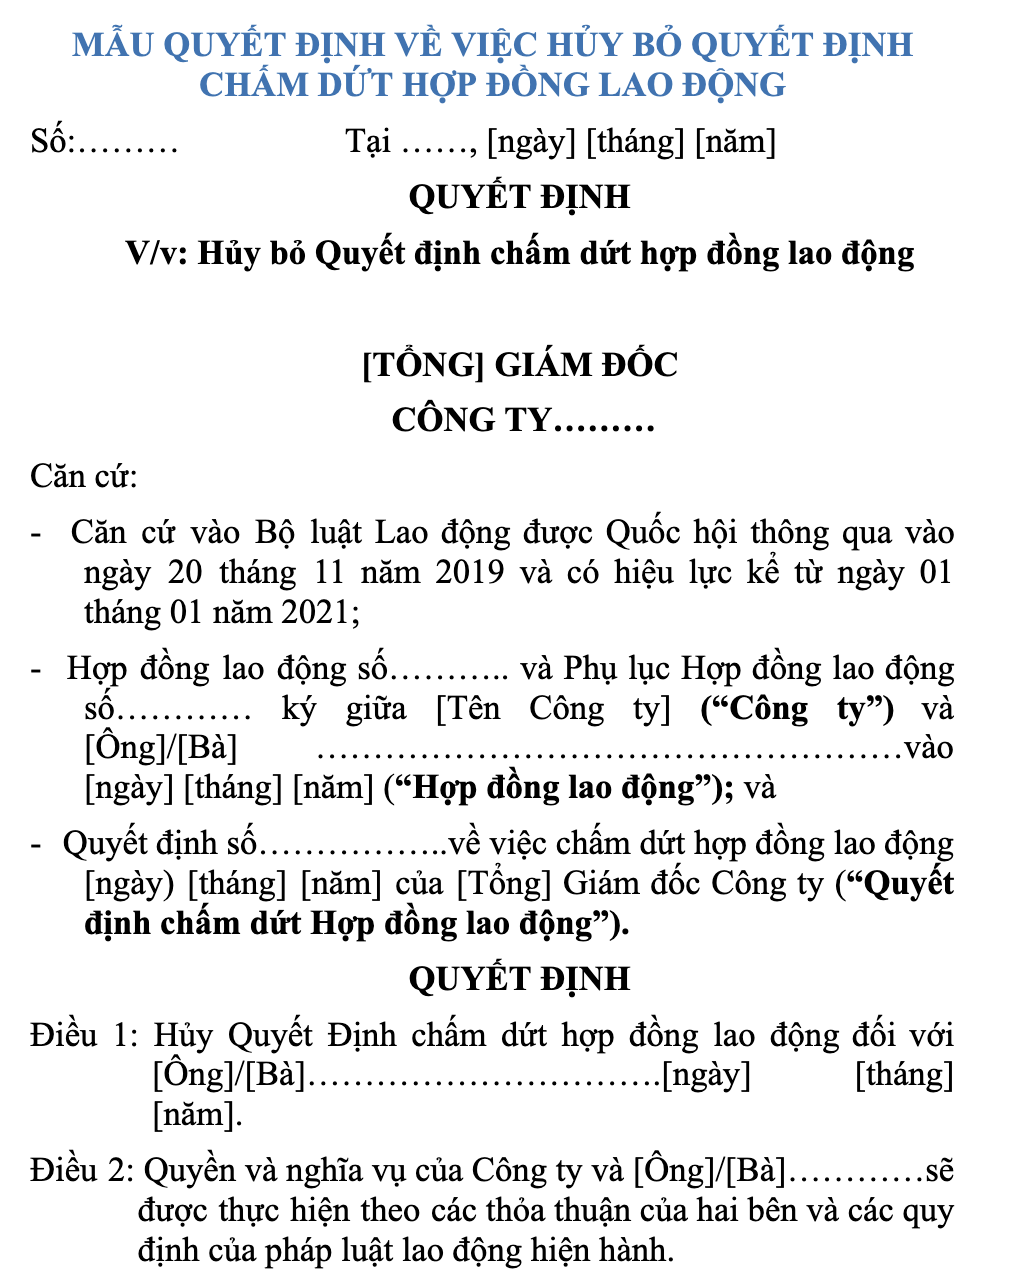 mau-quyet-dinh-ve-viec-huy-bo-quyet-dinh-cham-dut-hop-dong-lao-dong